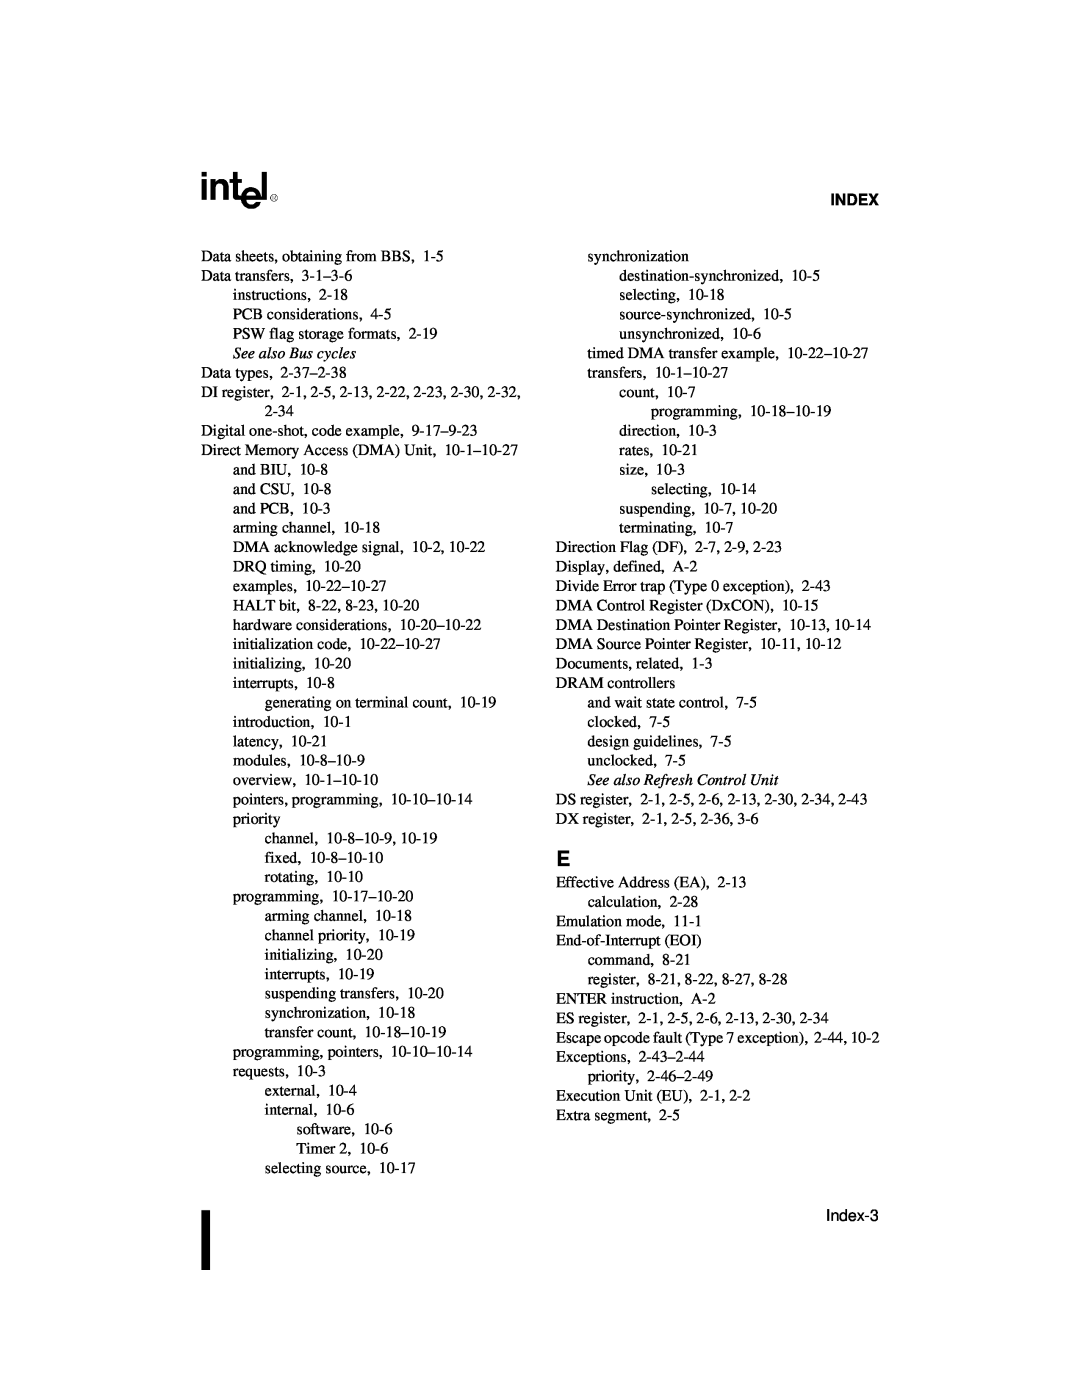 Intel 80C188XL, 80C186XL user manual See also Bus cycles, See also Refresh Control Unit, Index-3 